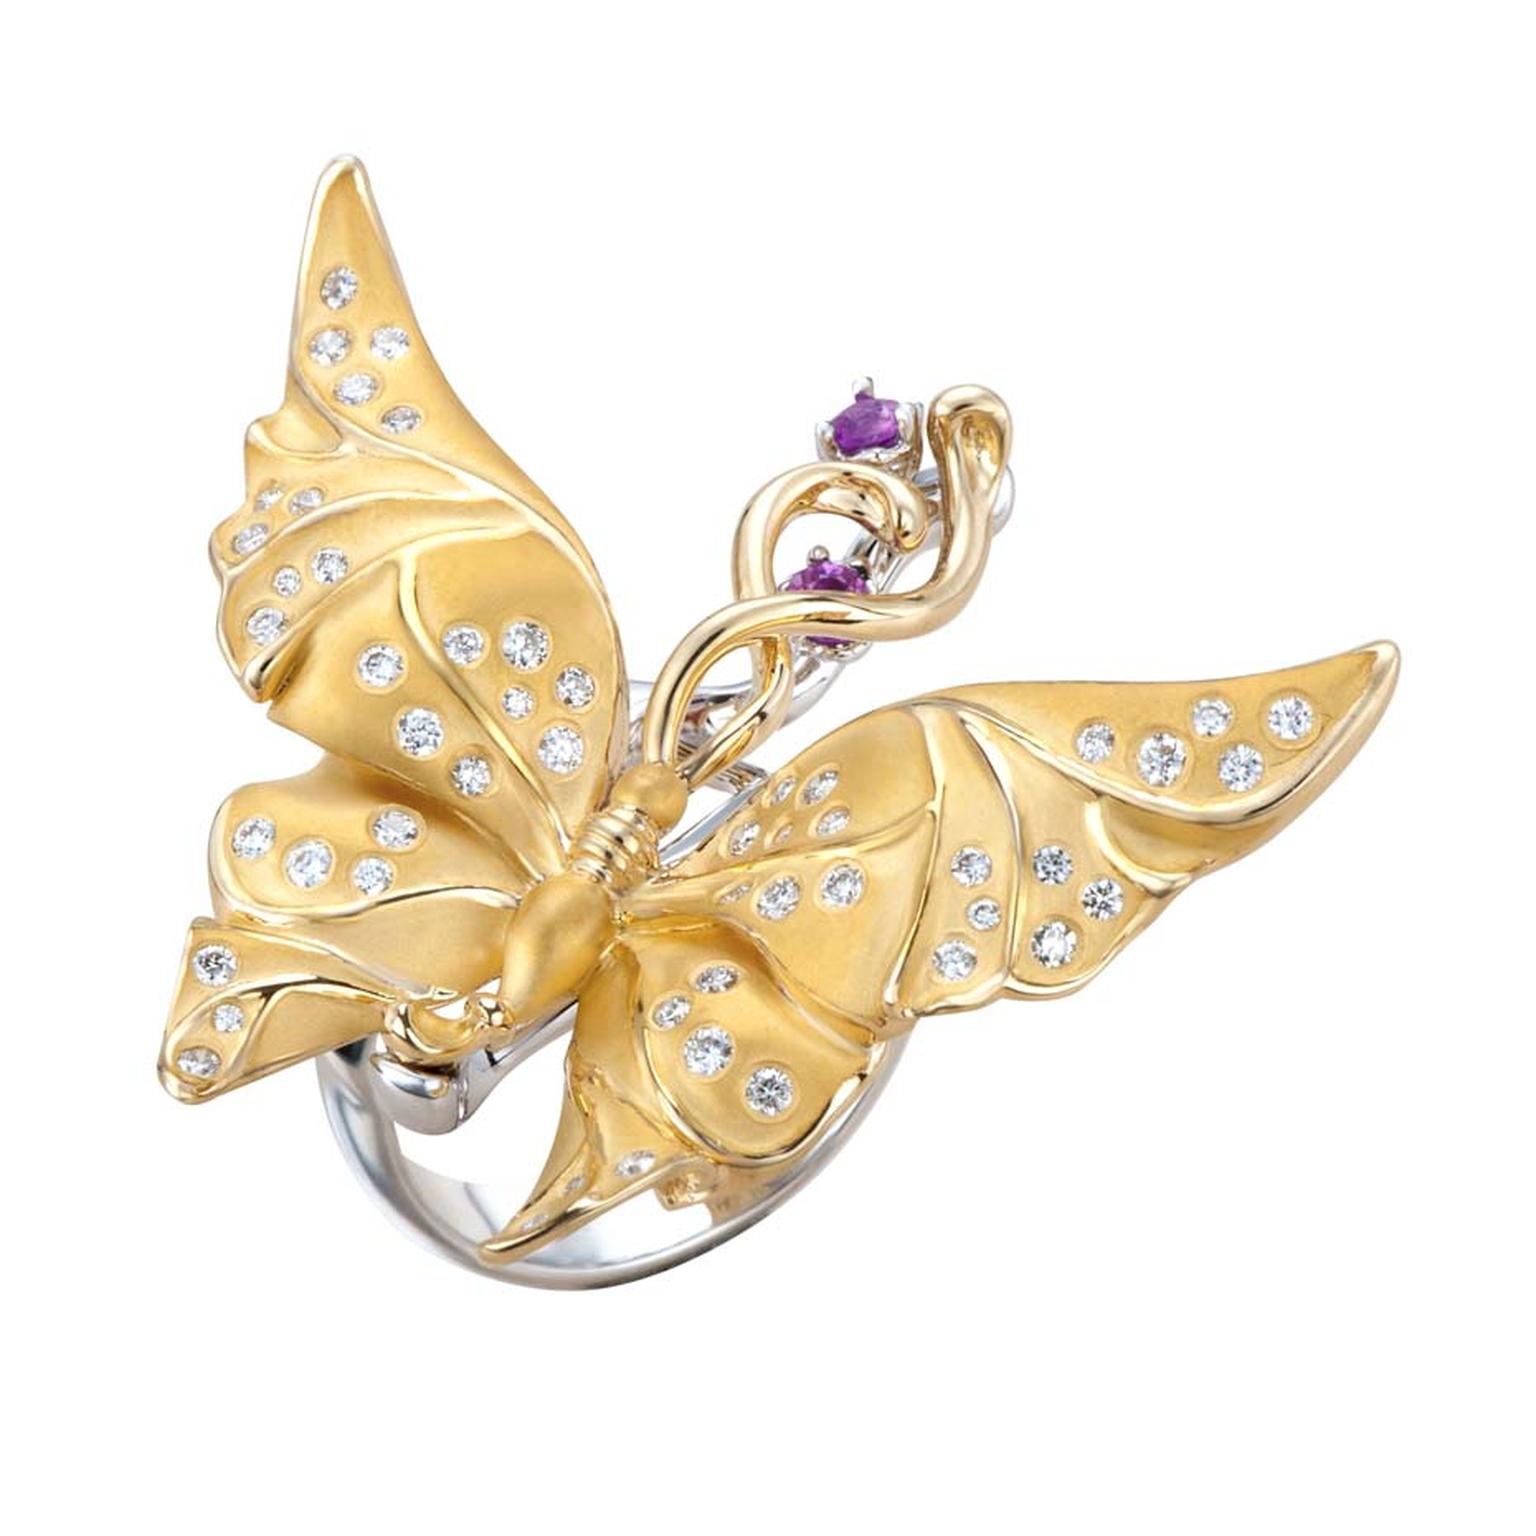 This Carrera y Carrera ring in yellow and white gold with diamonds and pink sapphires, from the new Universo collection, perfectly captures the beauty of a butterfly in flight.